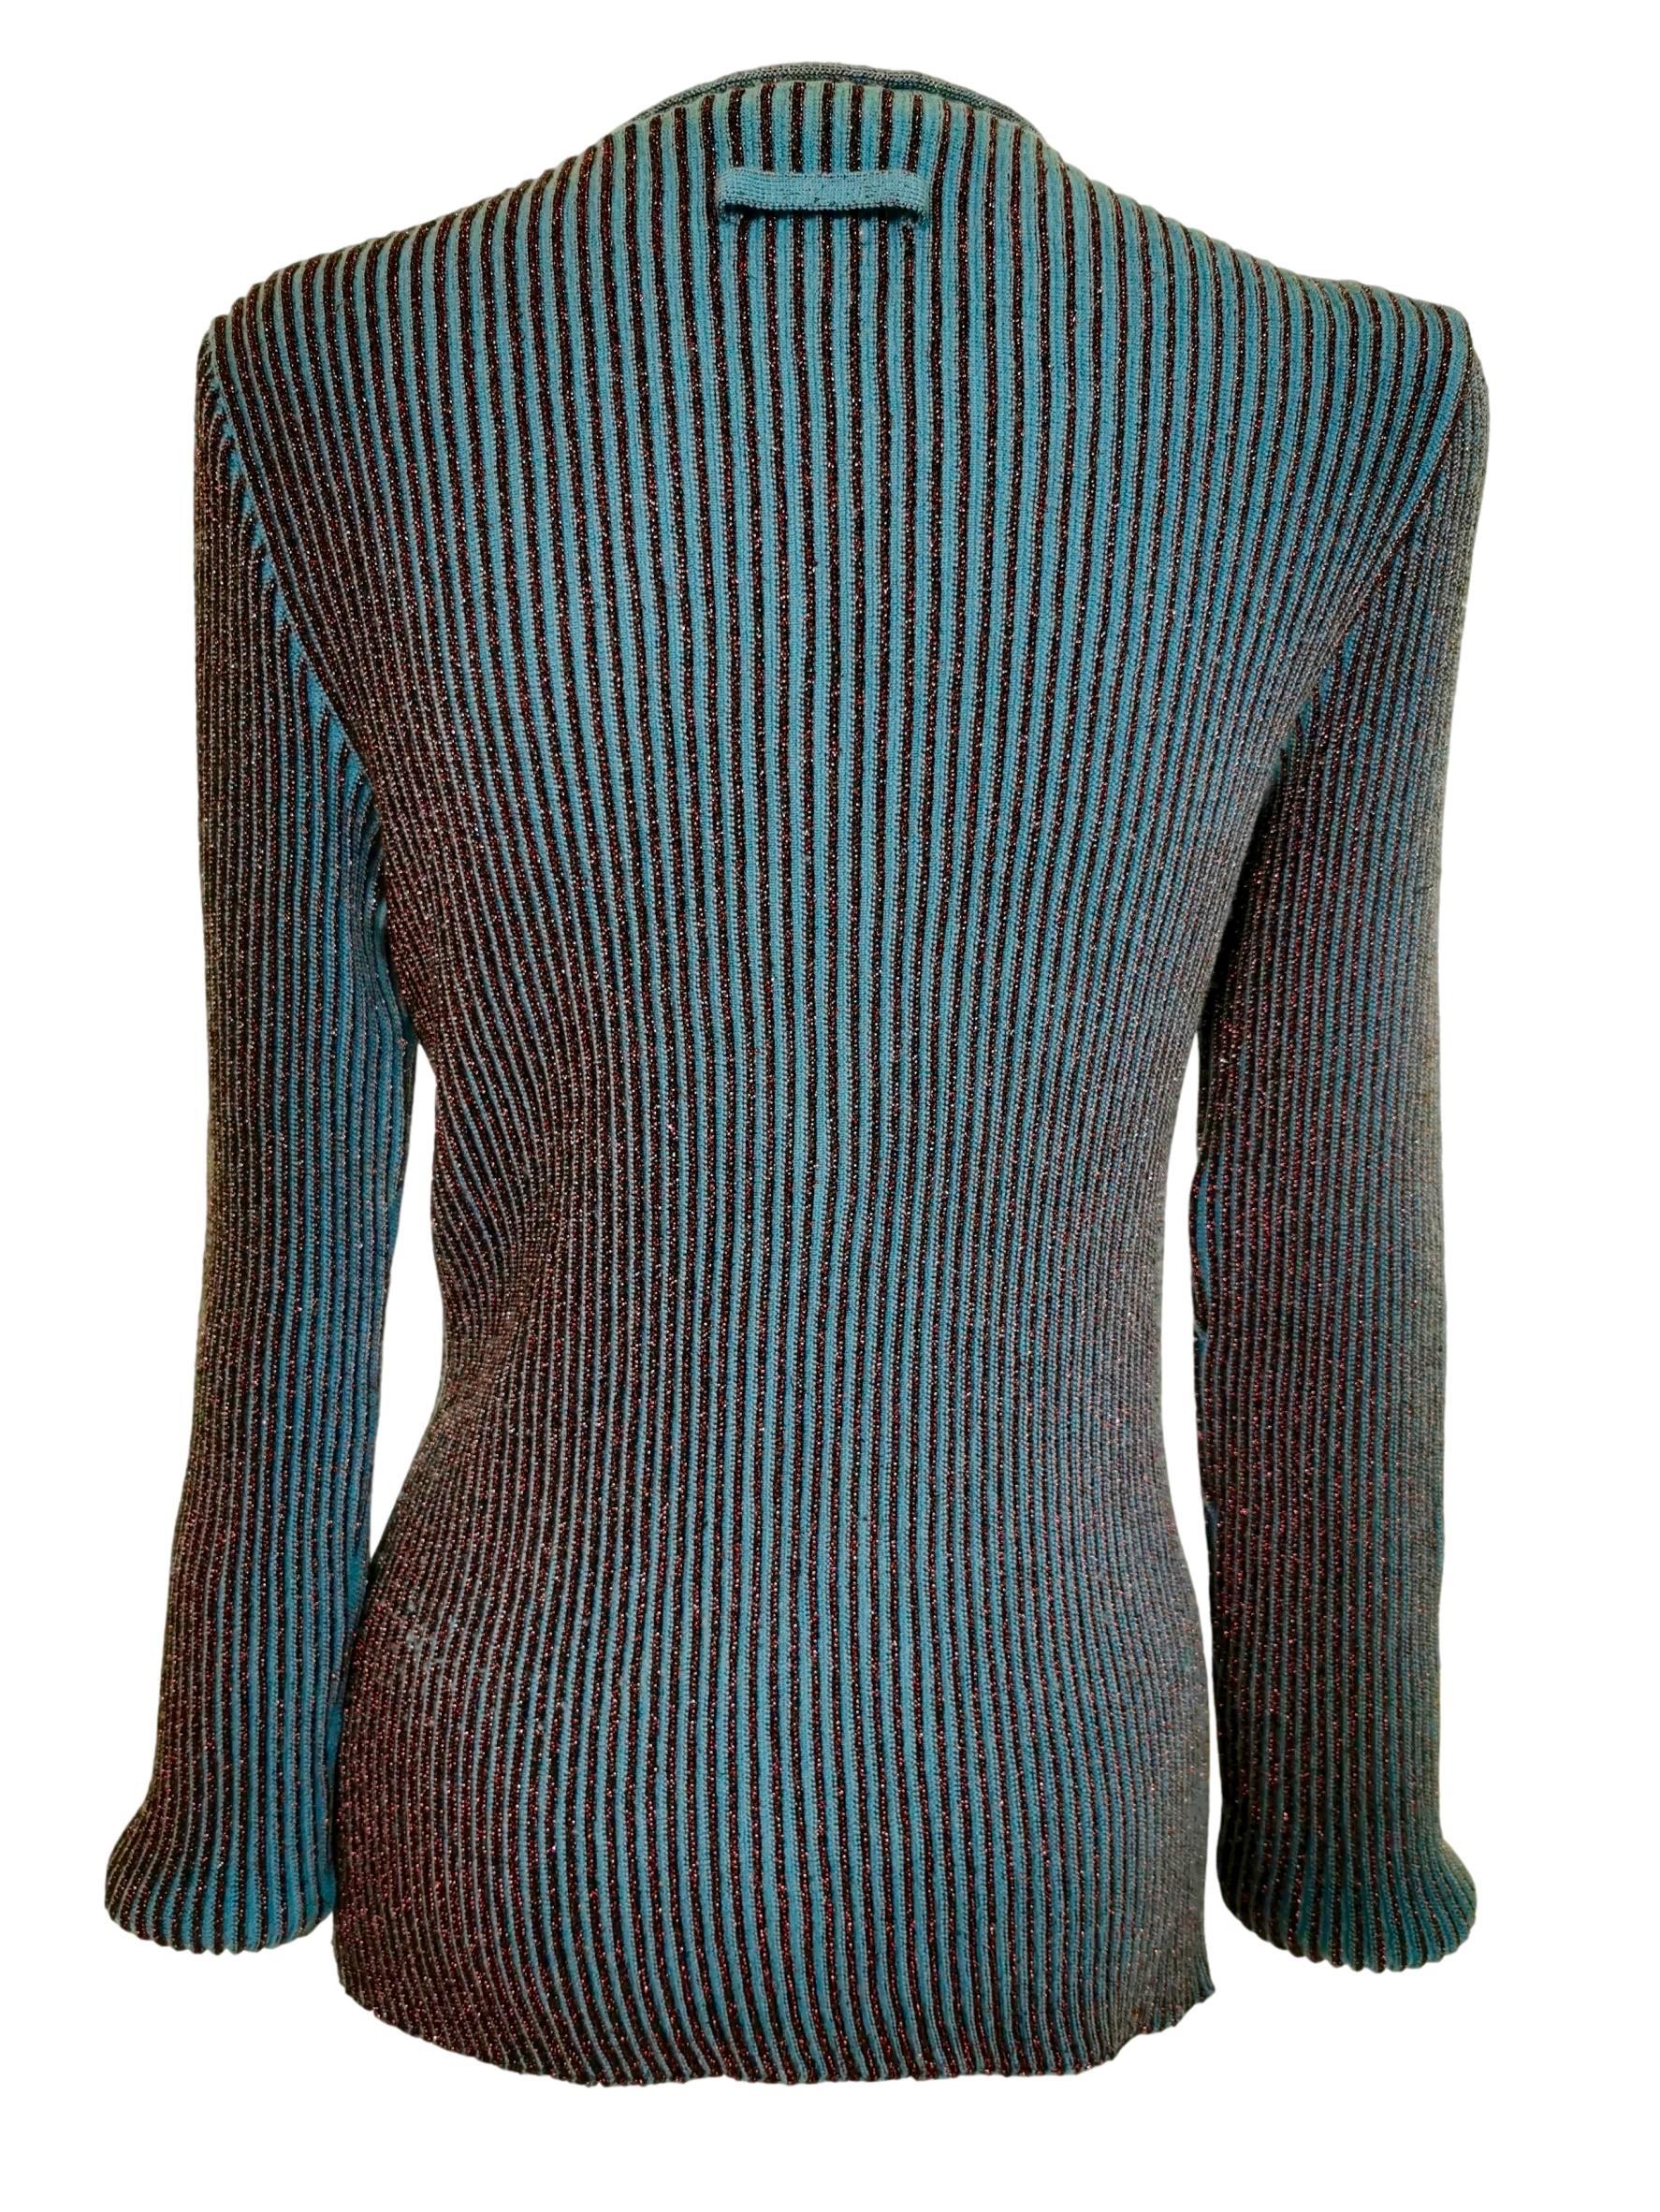 Jean Paul Gaultier Homme Label 
Knitted Ribbed Sweater
Red Lurex Stripe Throughout
Size S
Measures 30 Inches Underarm to Underarm
Fits upto 36 Inch Chest Comfortably